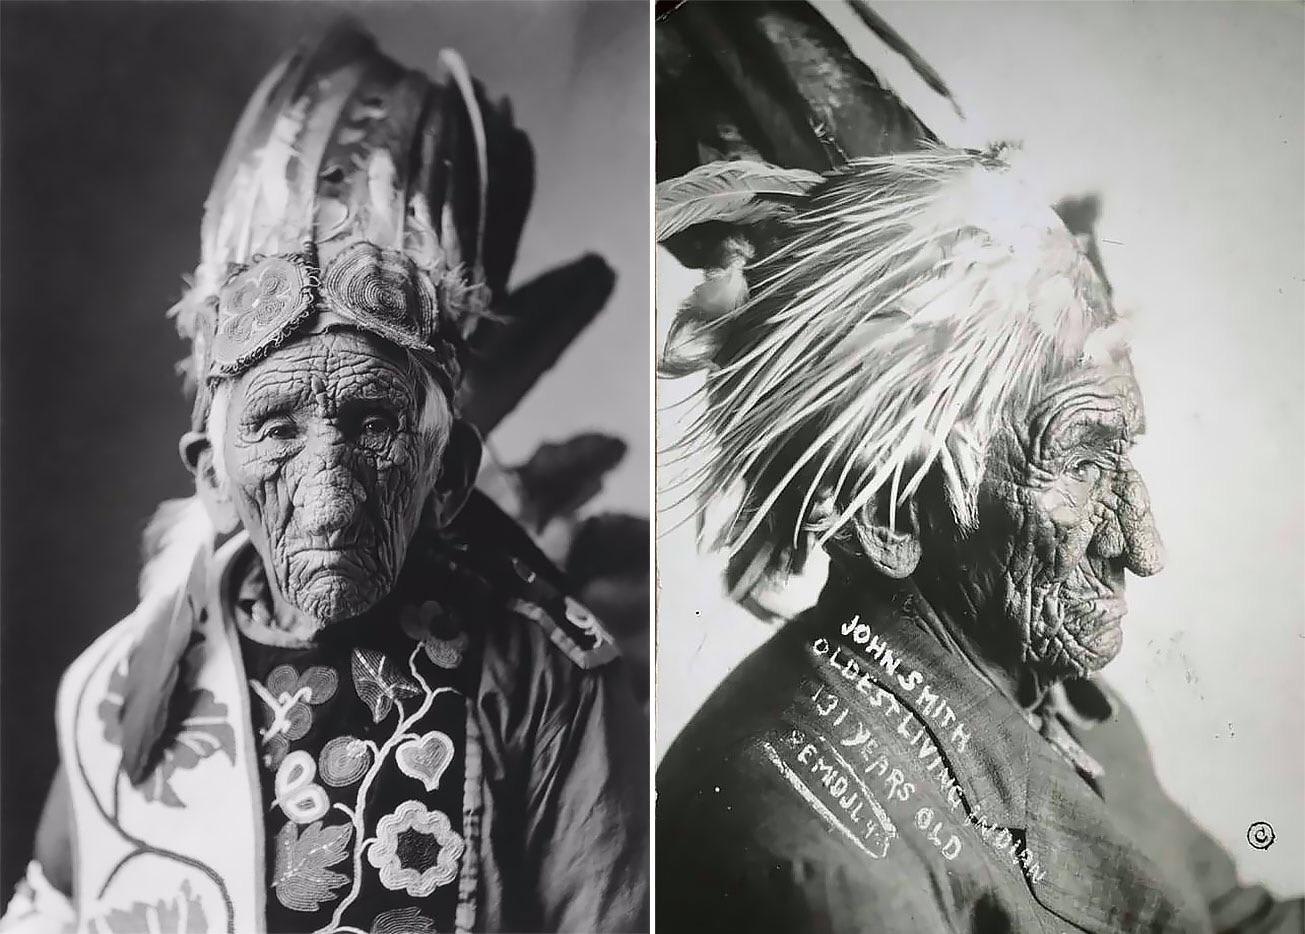 White wolf (Cheif John Smith) considered to be the oldest Native American that lived 1785-1922 (137 years old)